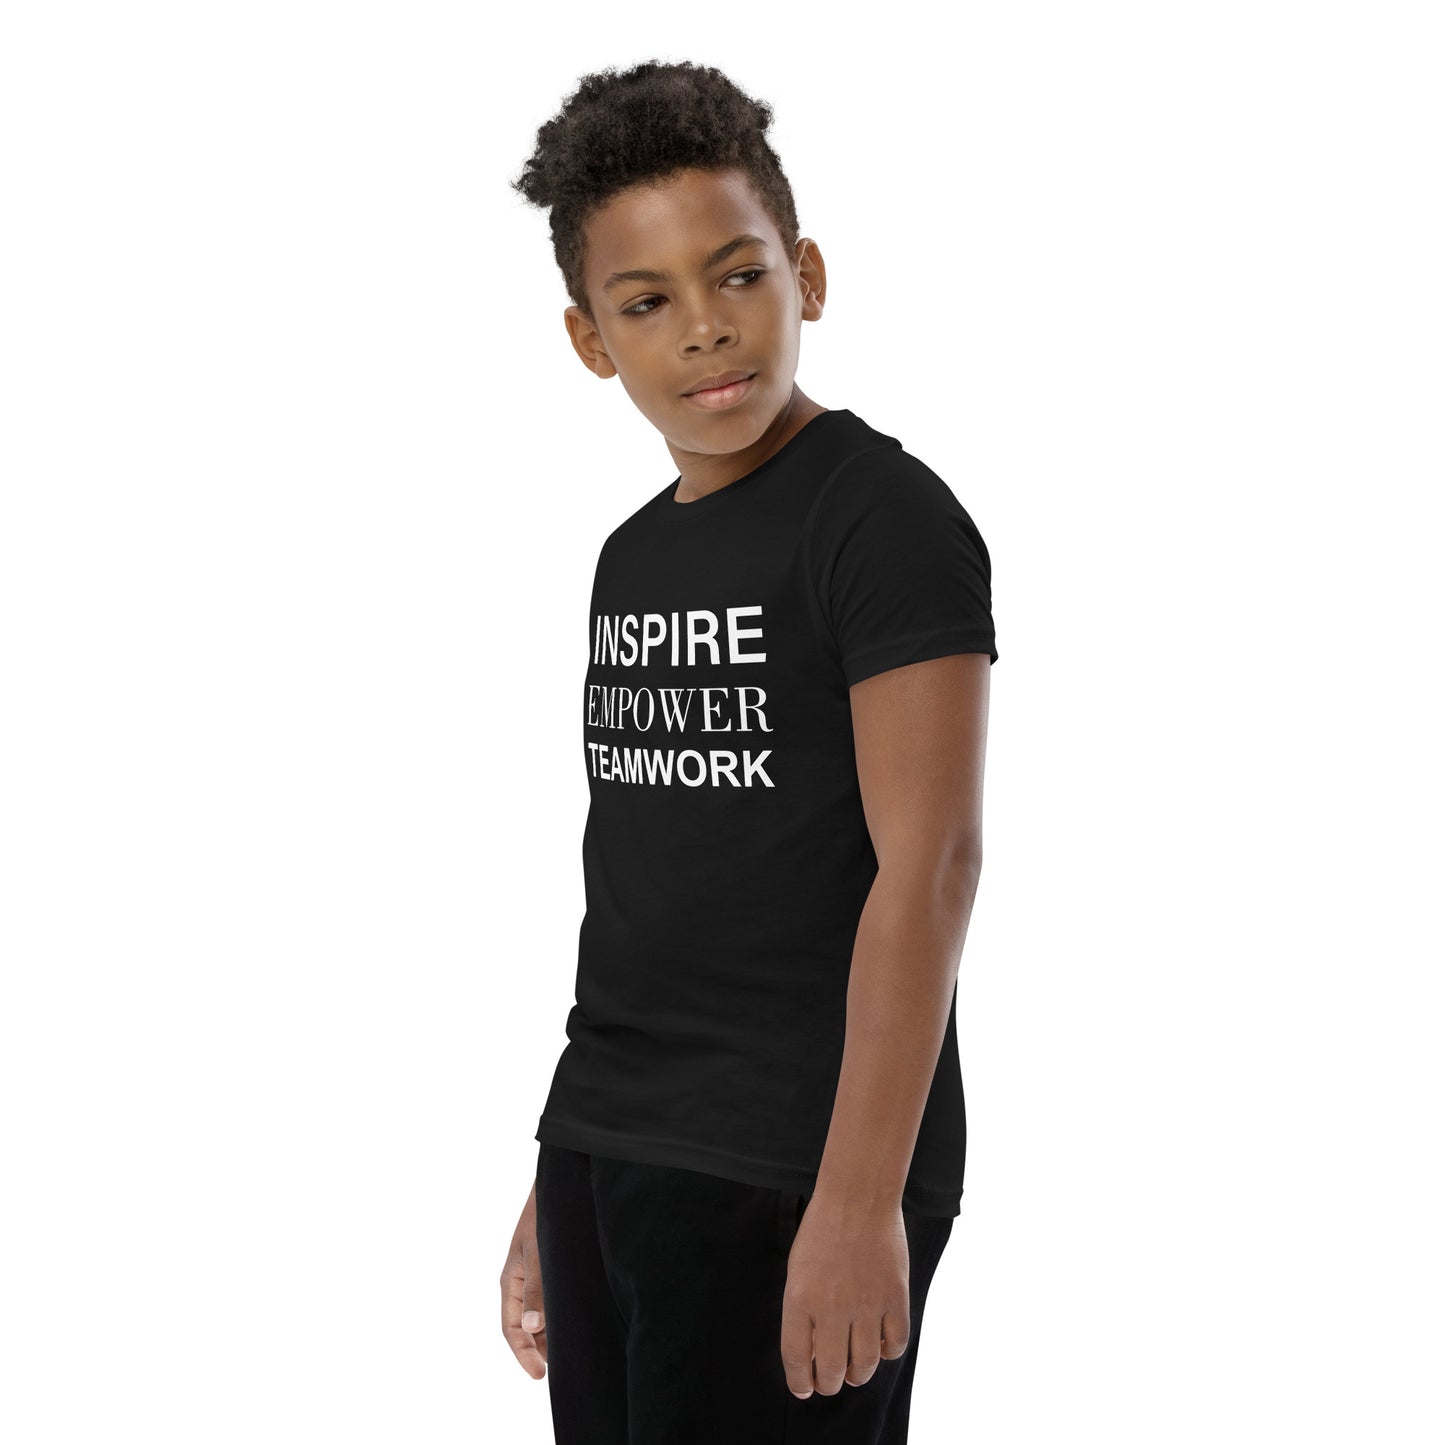 Inspire empower teamwork Youth Short Sleeve T-Shirt-Premium Quality and Inclusive Fashion